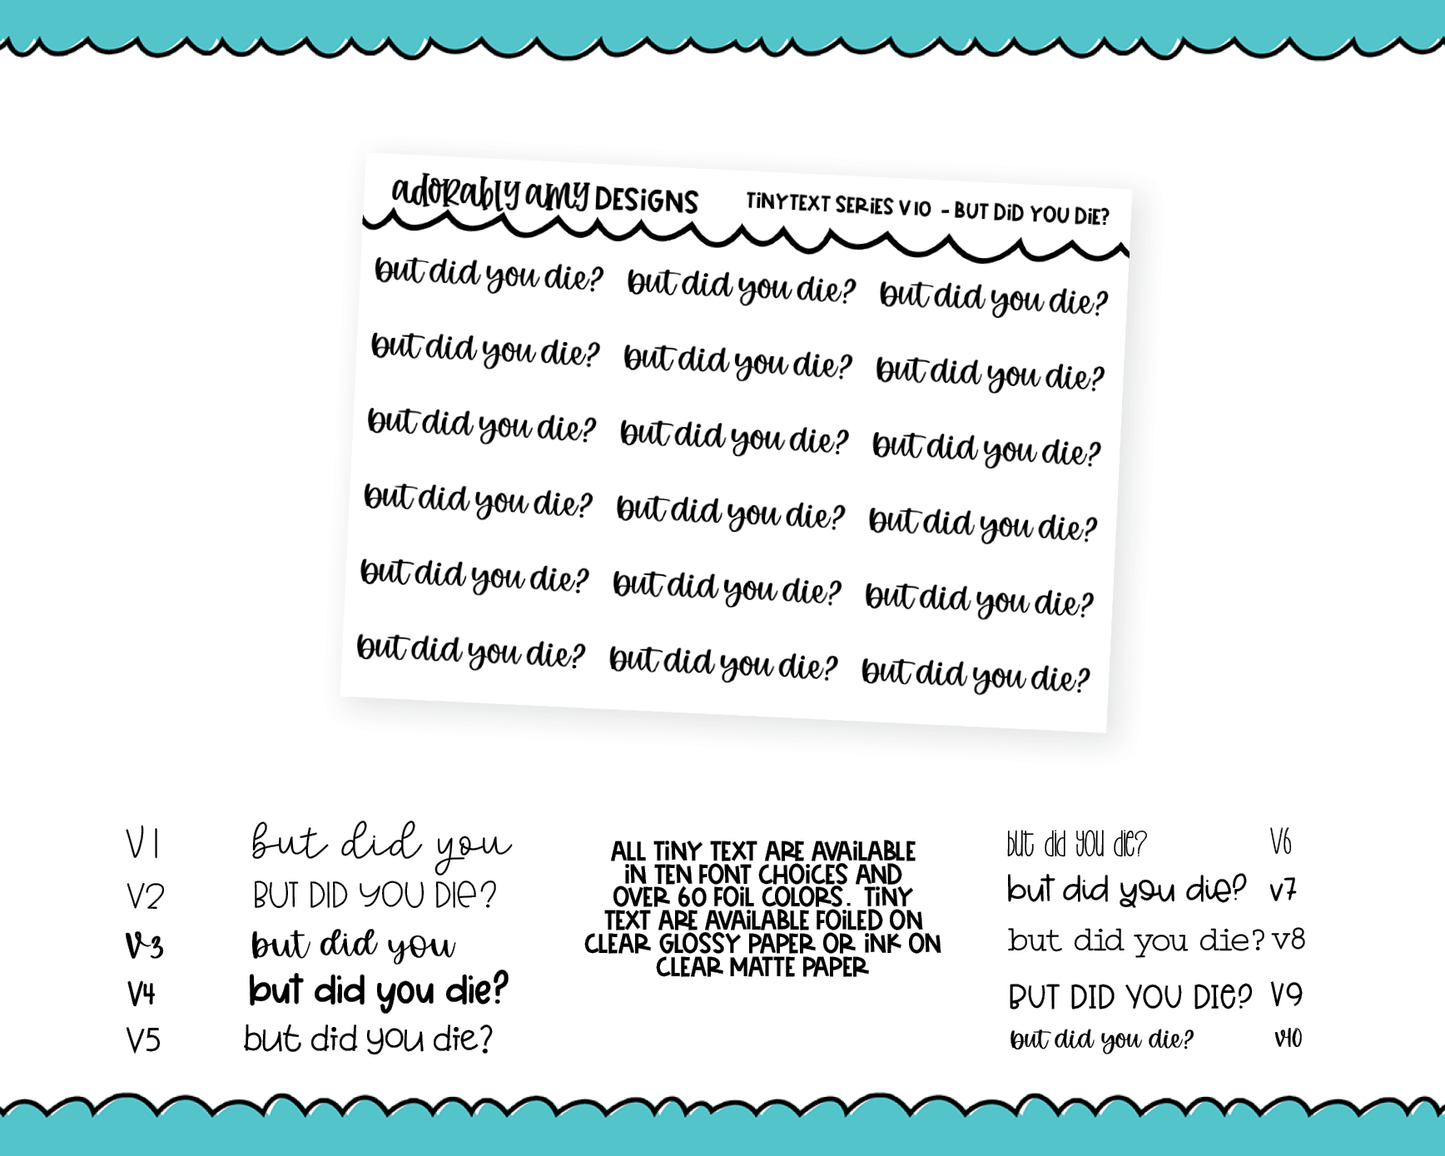 Foiled Tiny Text Series - But Did You Die? Checklist Size Planner Stickers for any Planner or Insert